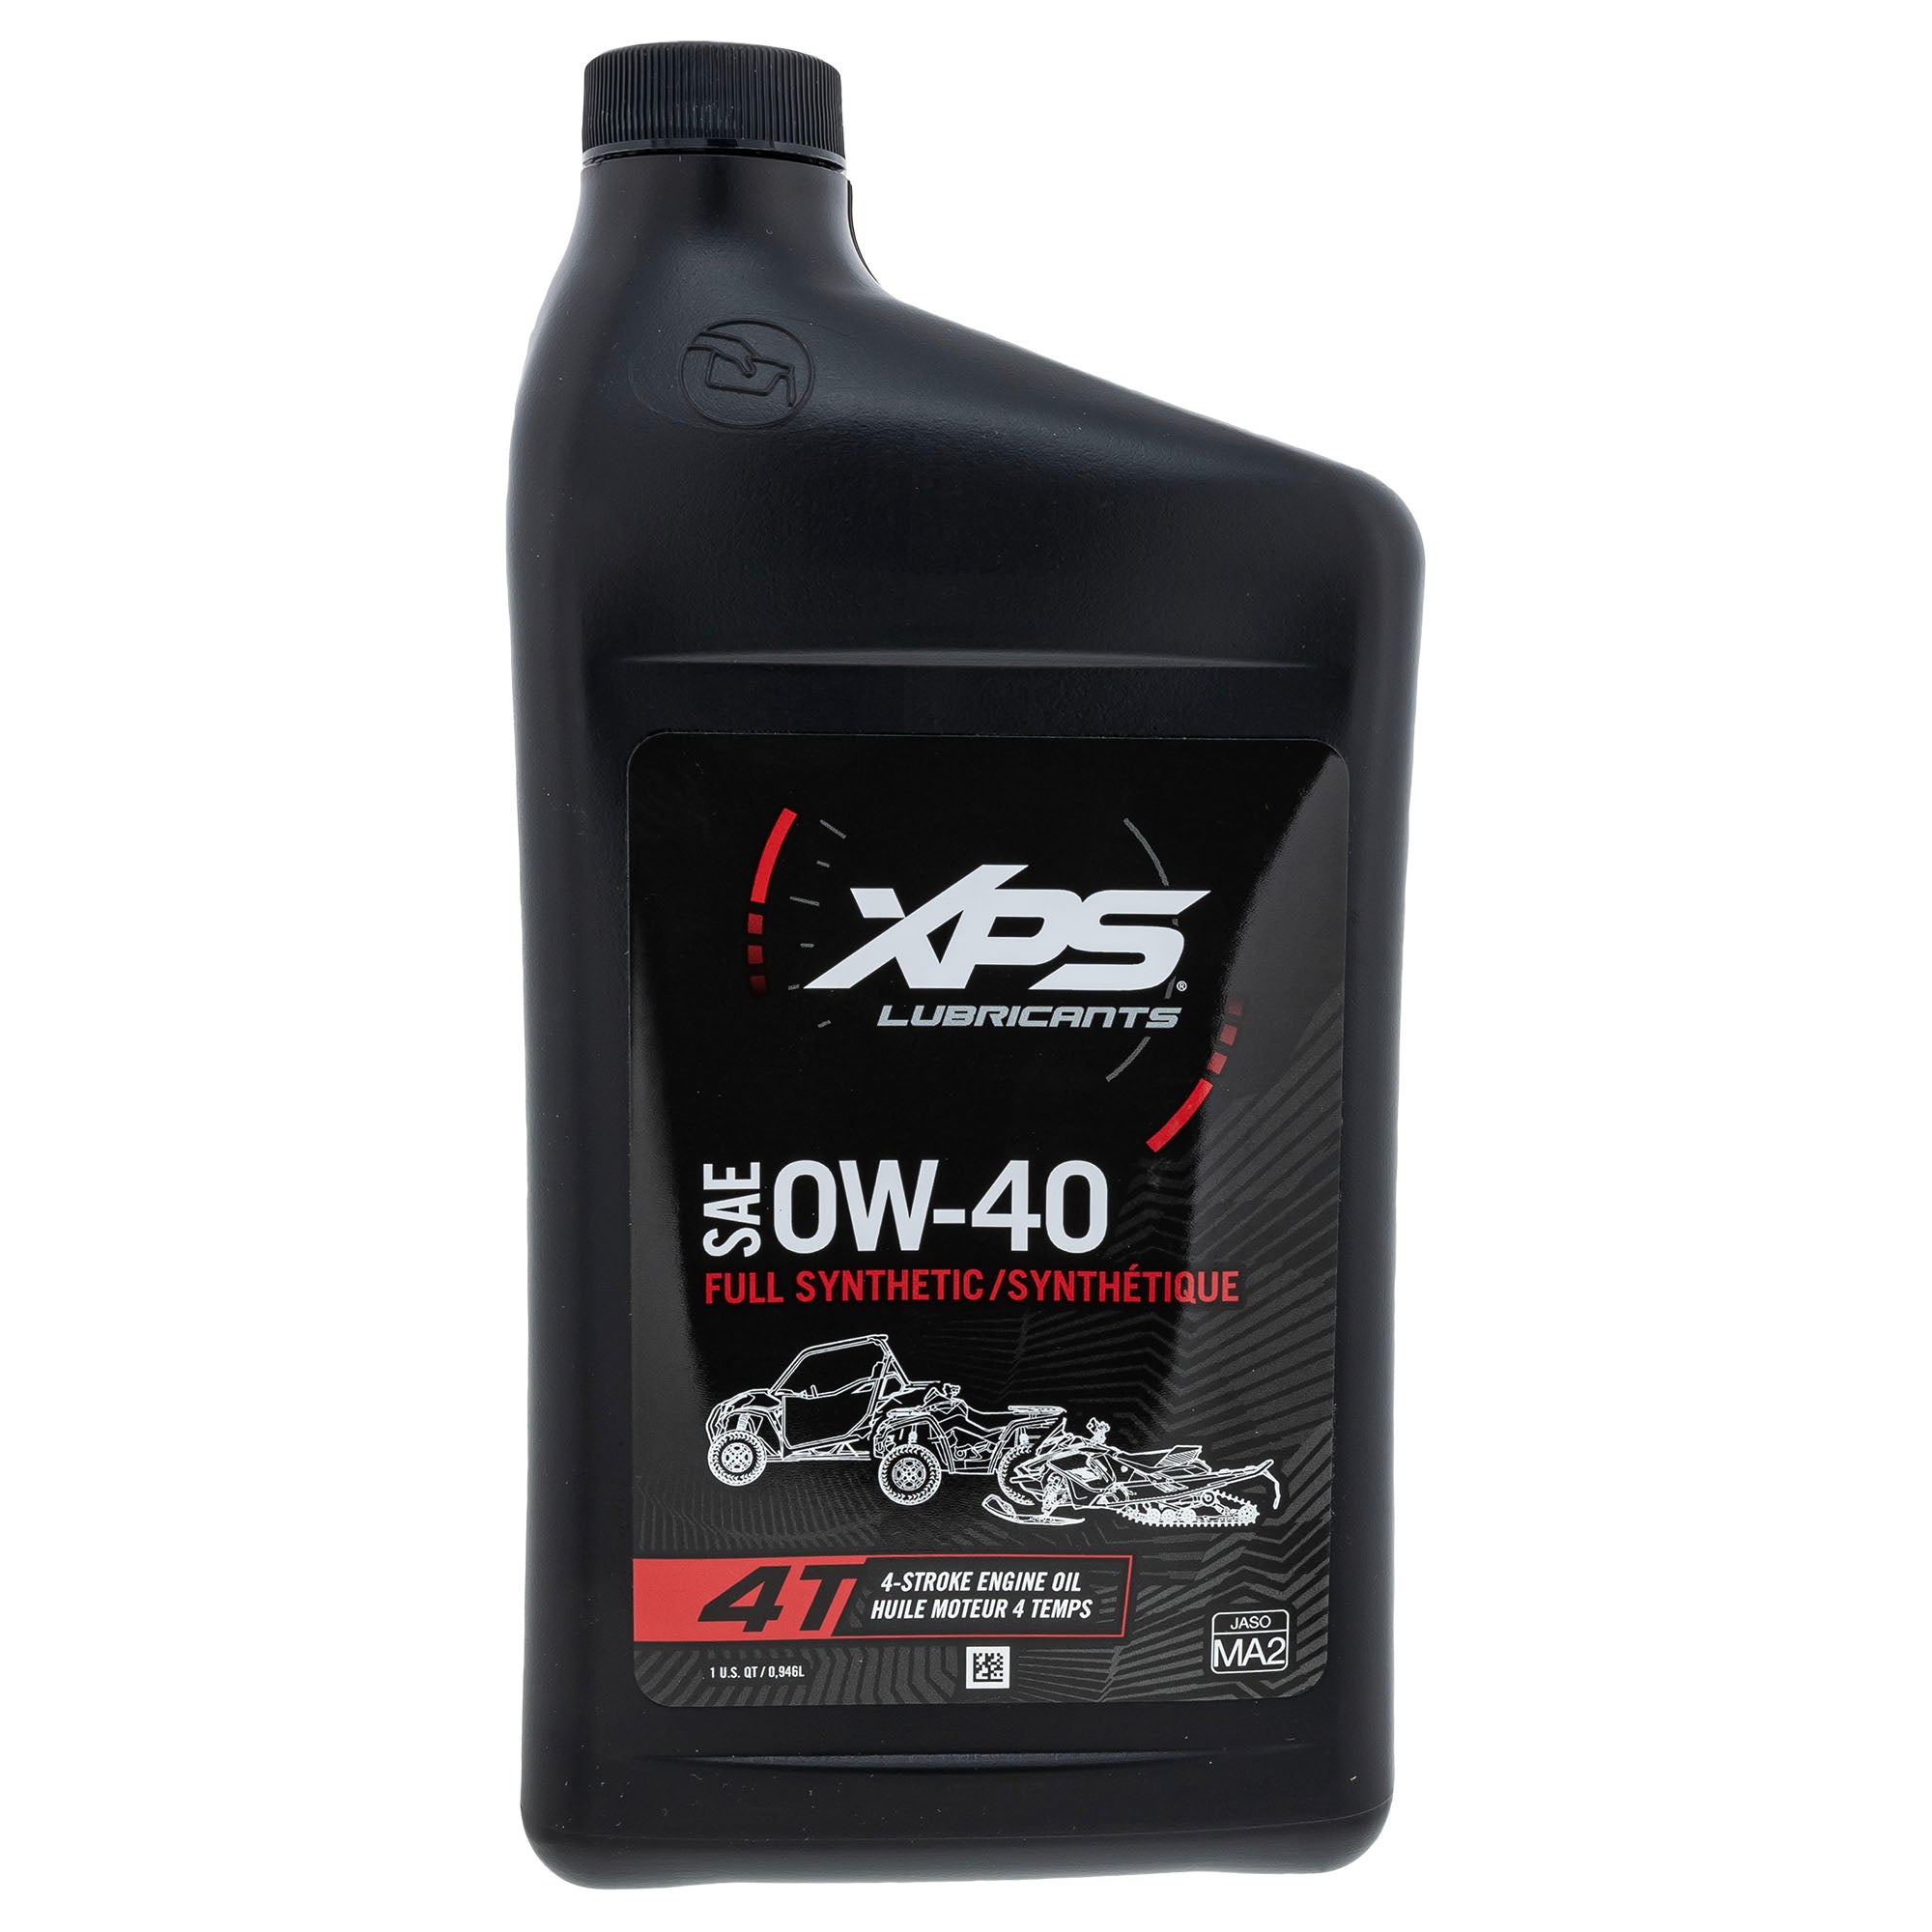 Ski-Doo 9779255 BRP Can-Am XPS 0W-40SAE Synthetic Oil Change Kit Rotax 1200 Engines